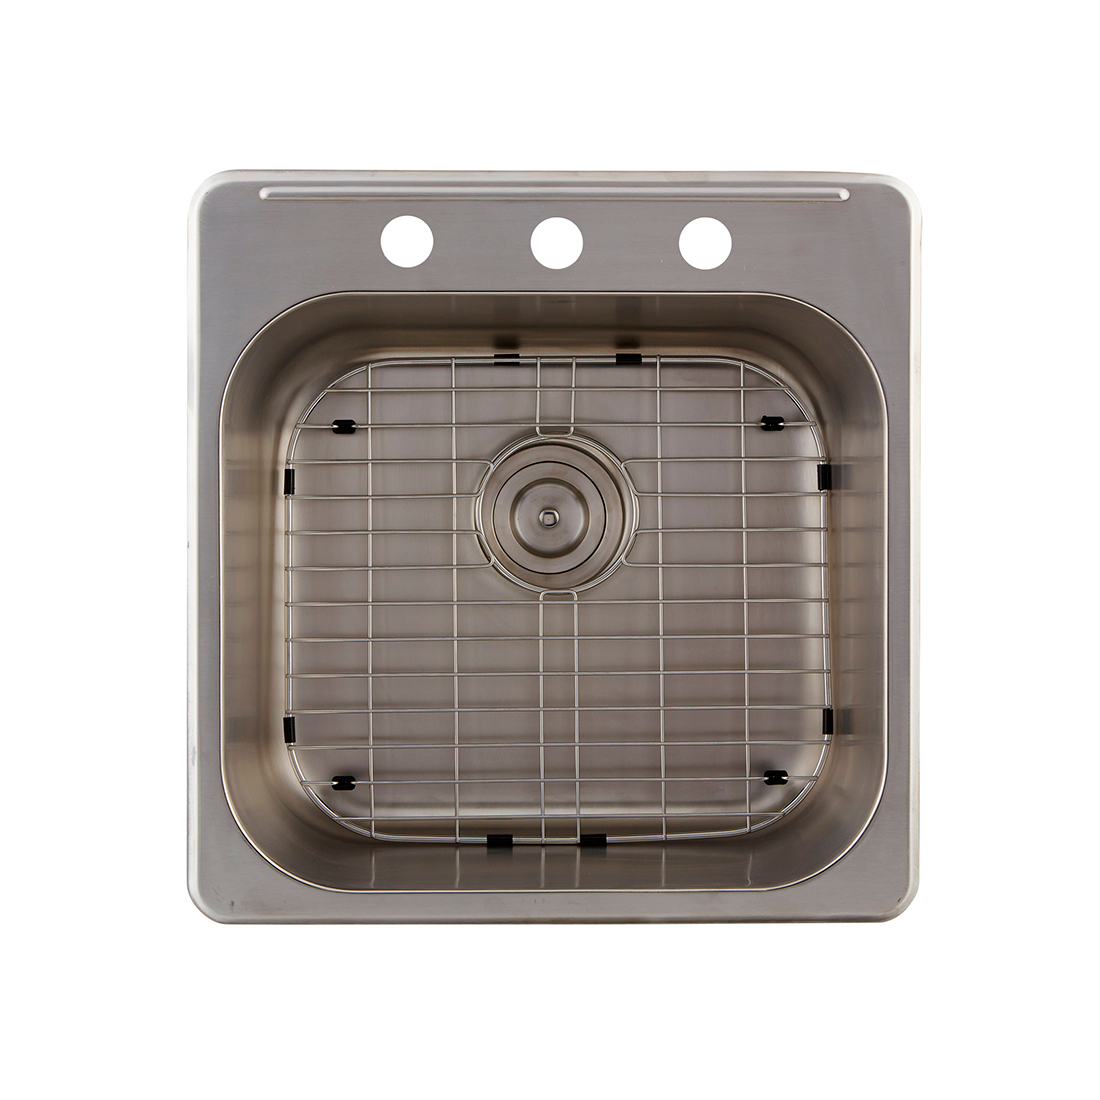 DAX Grid for Kitchen Sink, Stainless Steel Body, Chrome Finish, Compatible with DAX-OM2020, 17 x 15-1/4 Inches (GRID-OM2020)